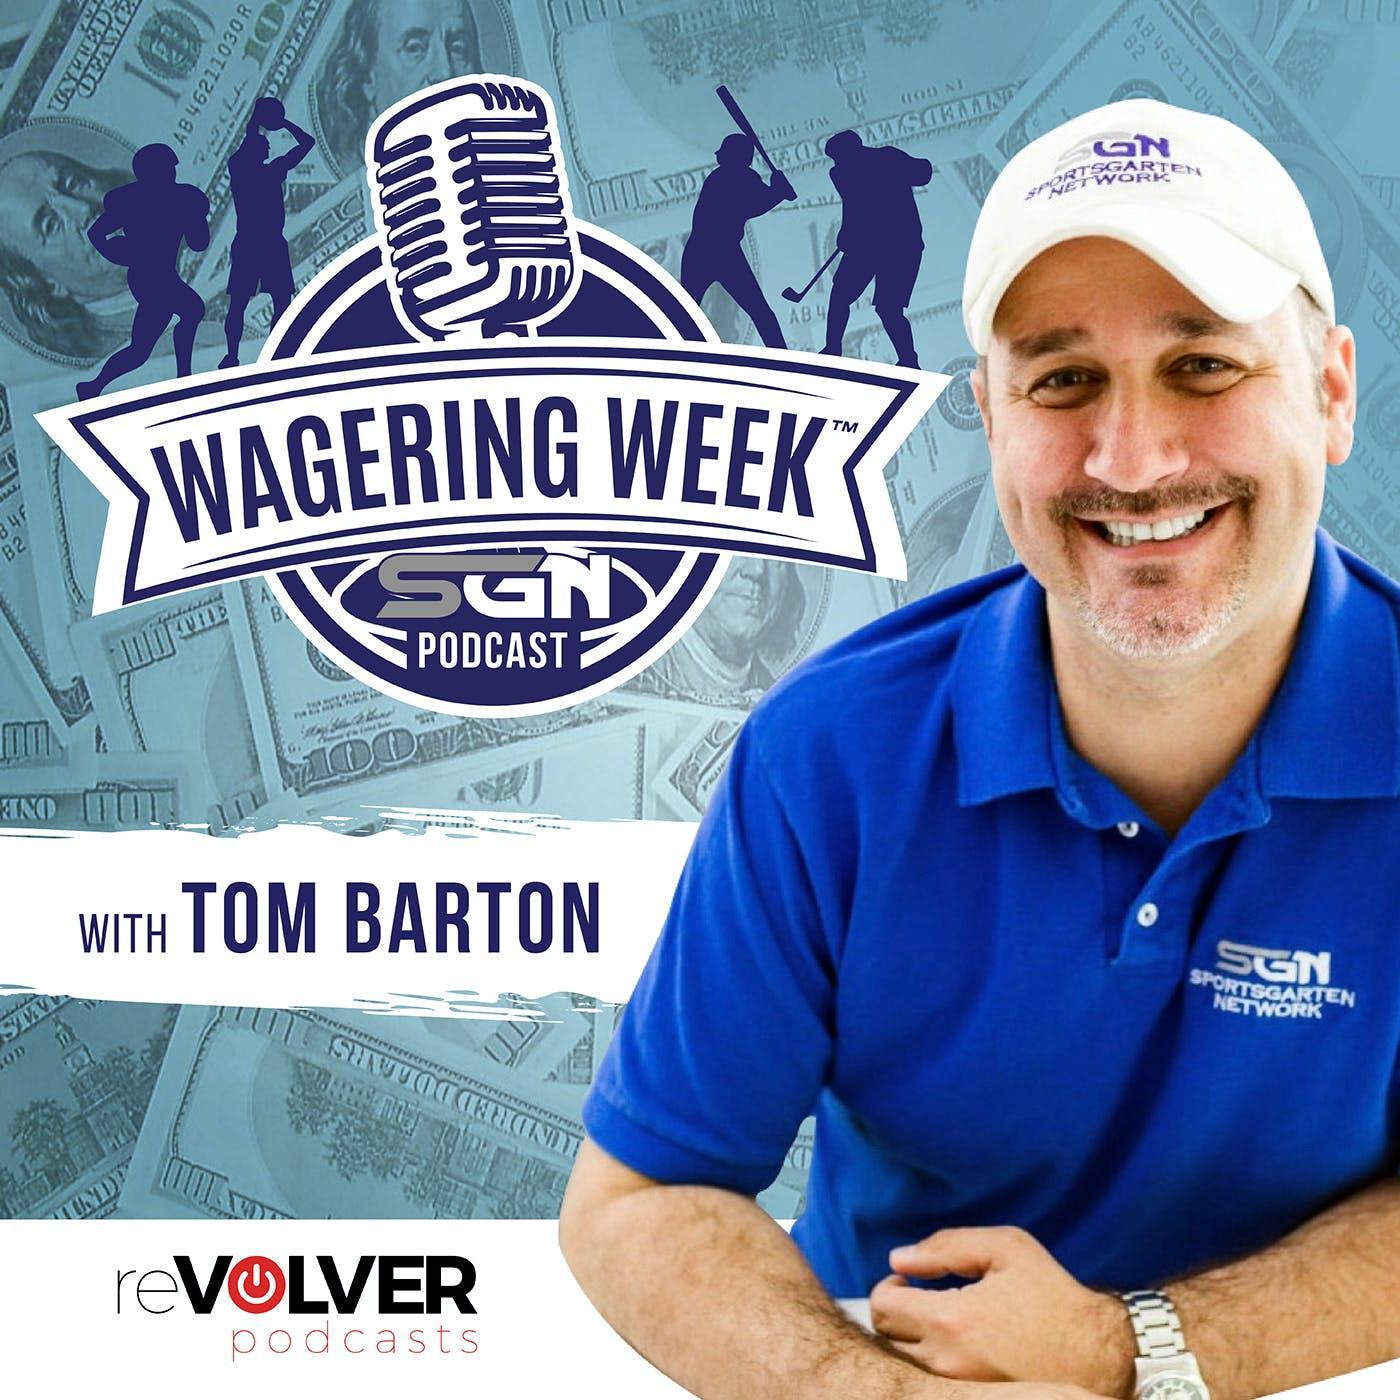 Show poster of Wagering Week